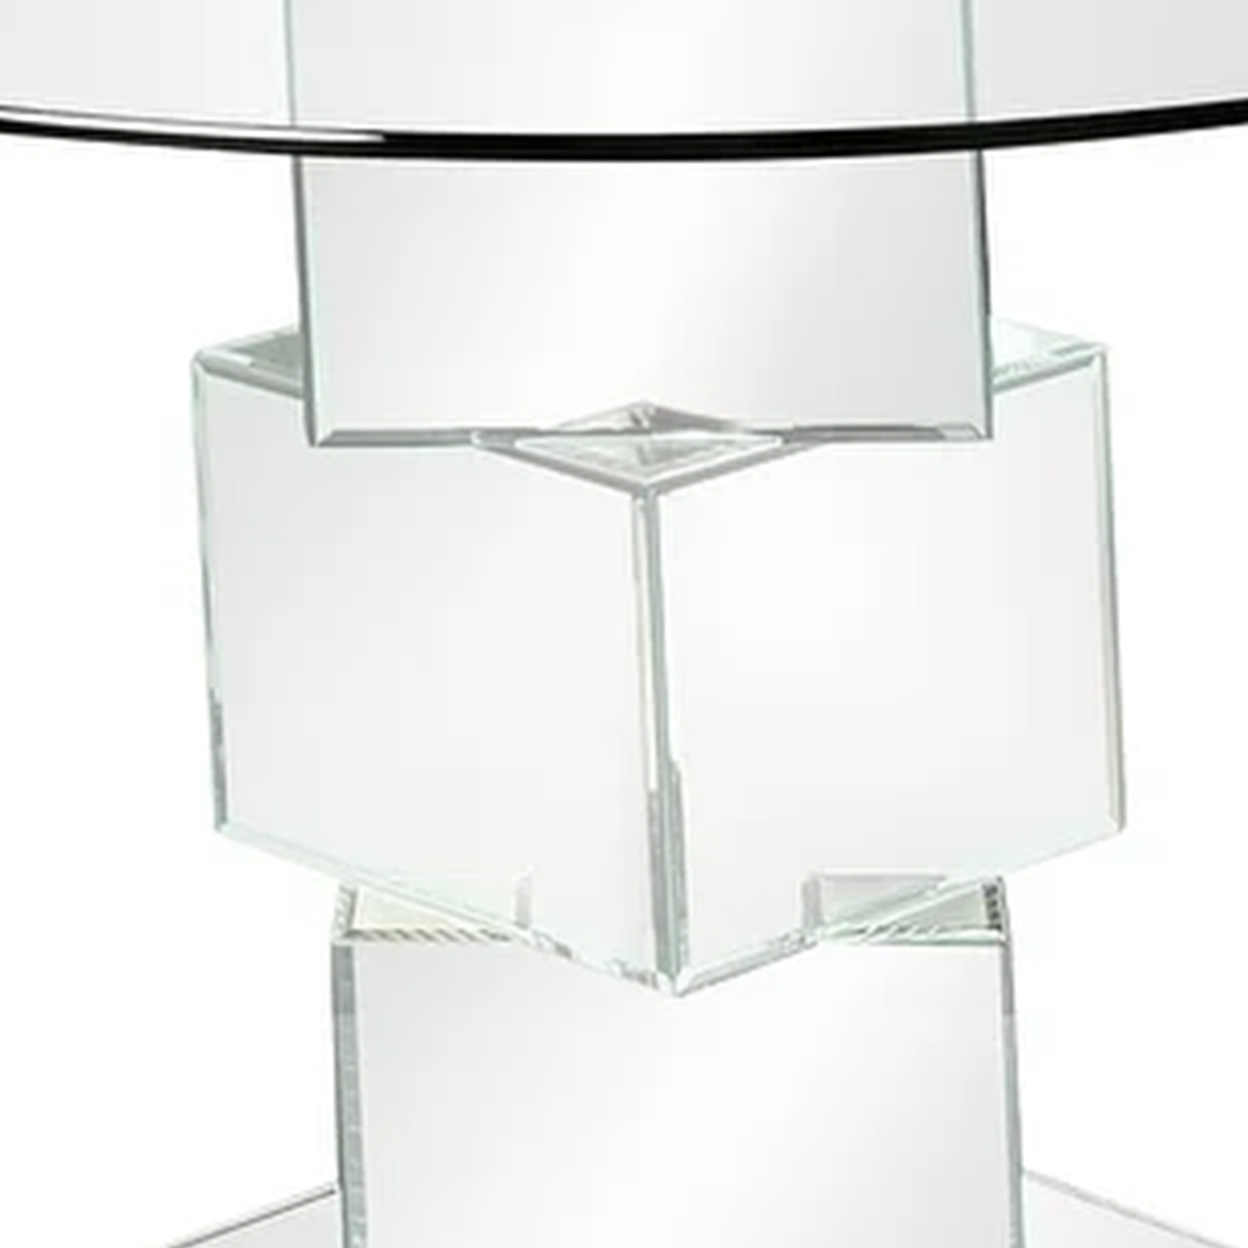 Dining Table With Round Glass Top, Silver And Clear- Saltoro Sherpi